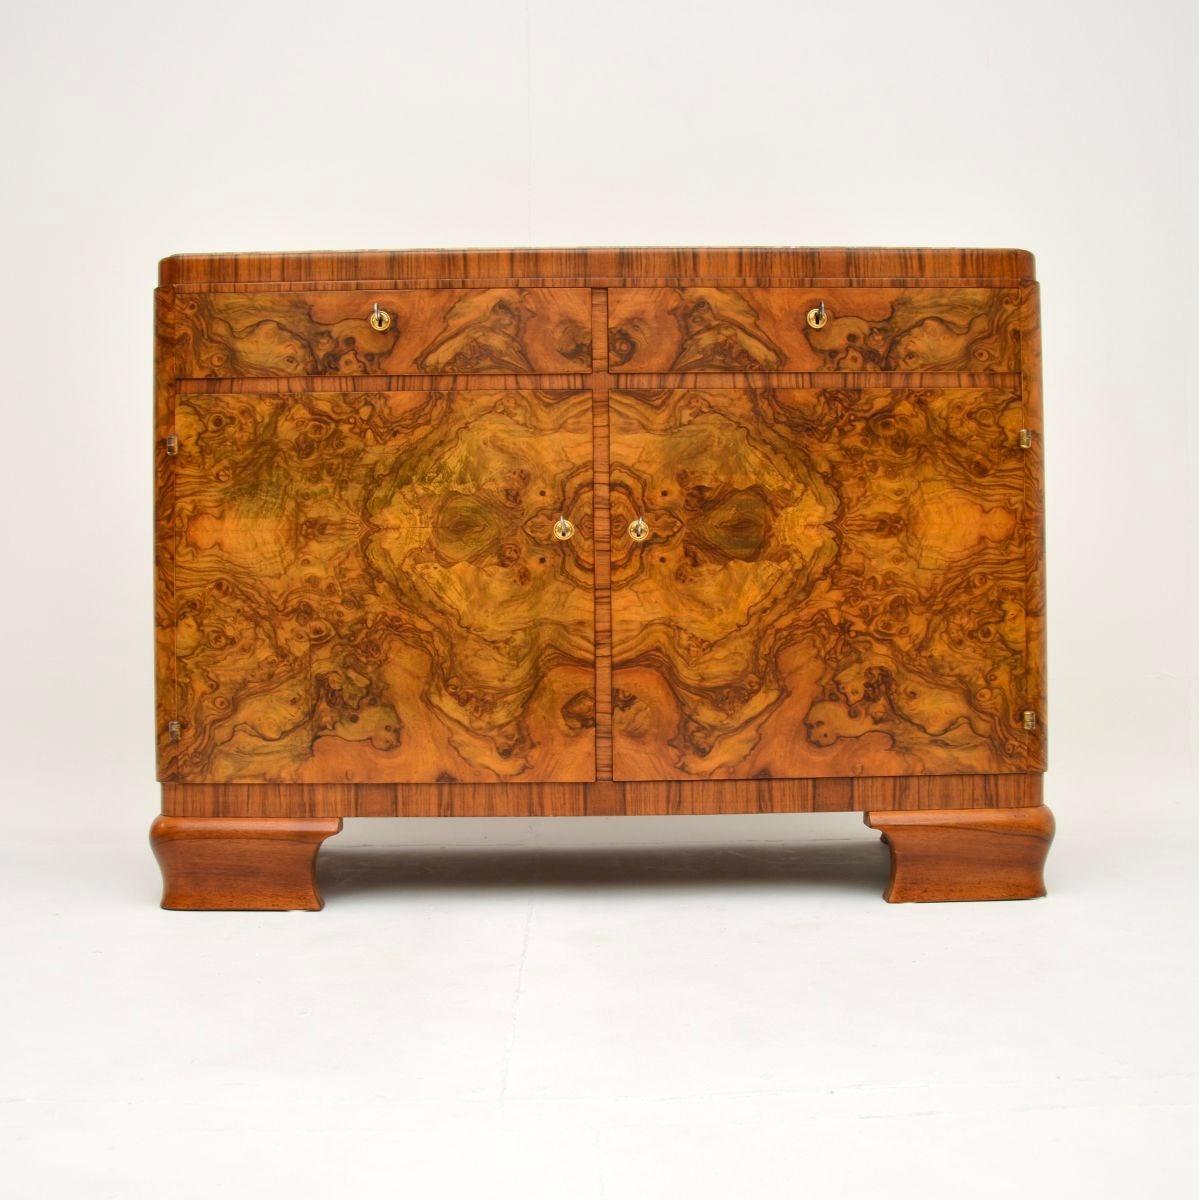 An absolutely stunning and extremely well made Art Deco burr walnut marble top sideboard. This was made in France, it dates from the 1920-30’s.

The quality is outstanding, this is beautifully made and has lovely proportions. The burr walnut colour